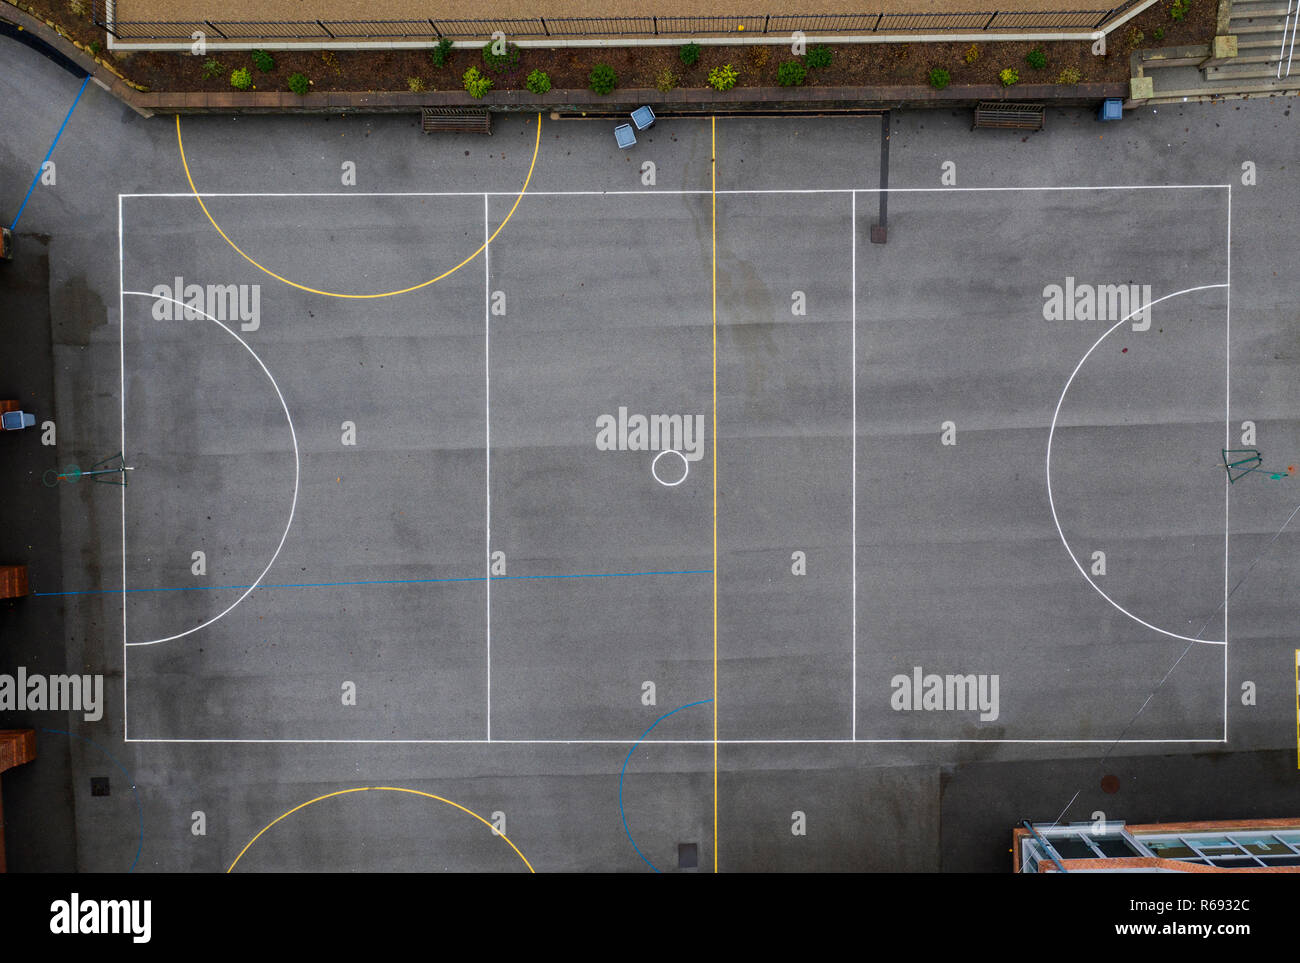 Aerial overhead view of an outdoor netball court Stock Photo